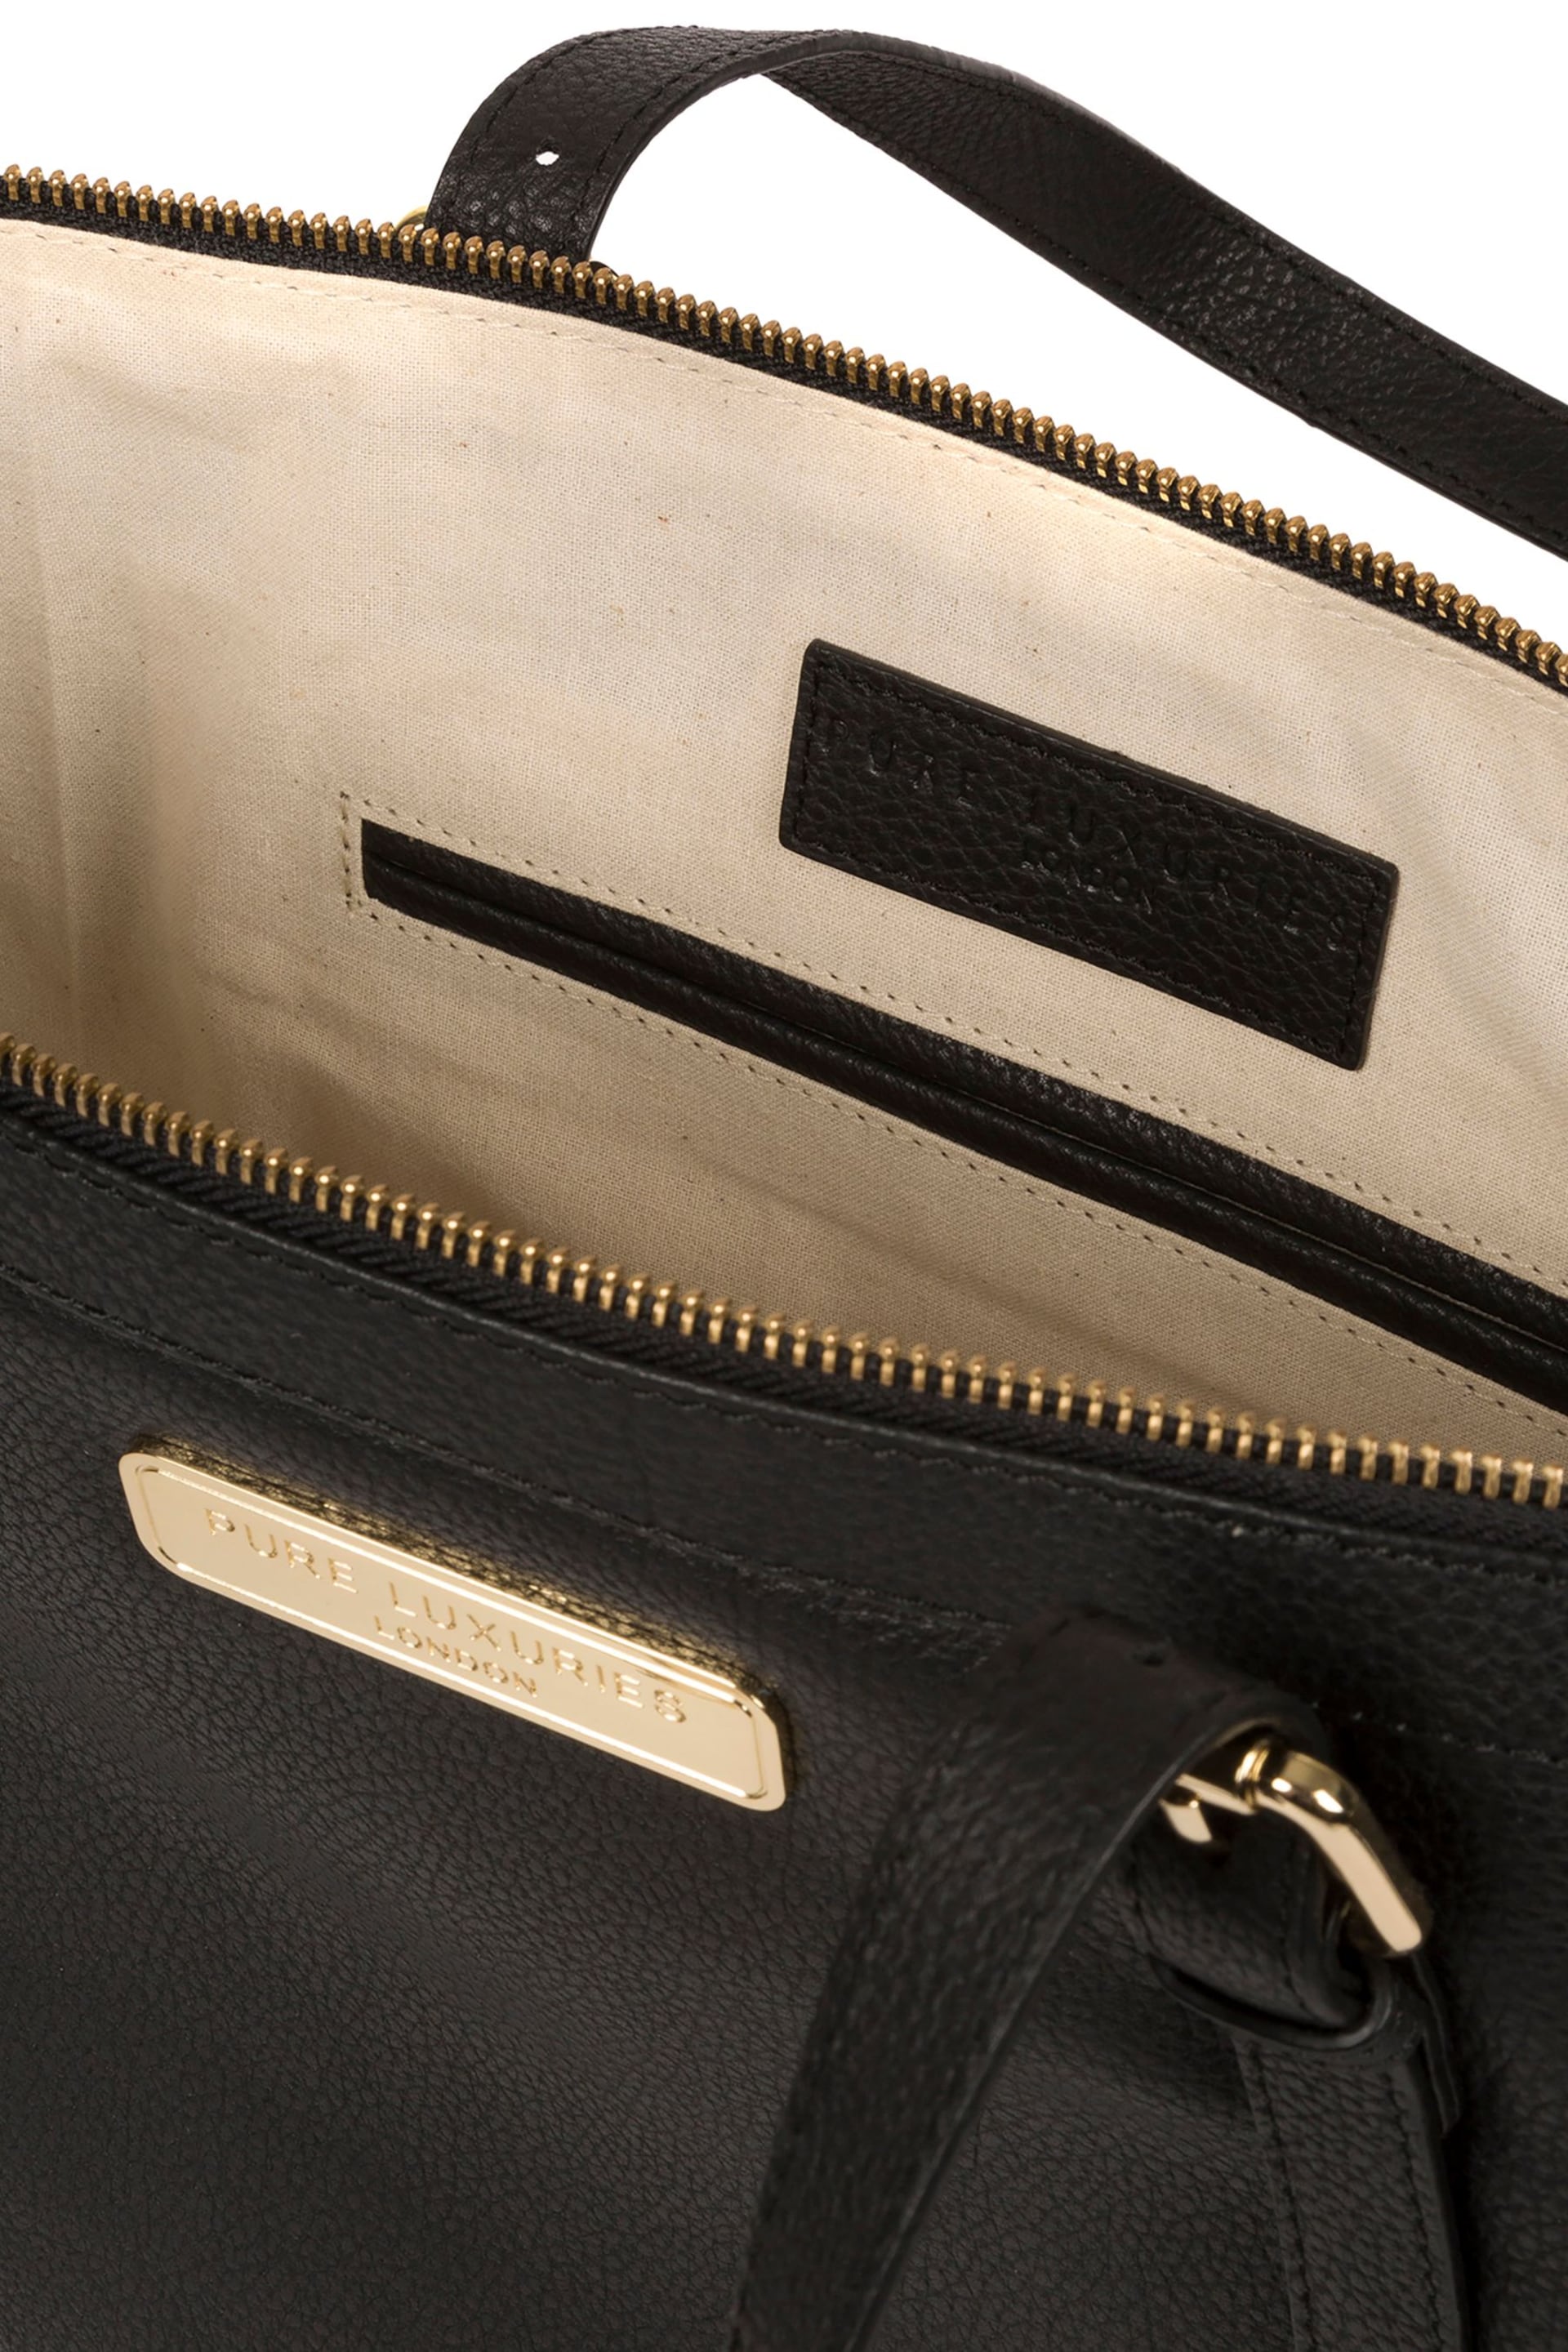 Pure Luxuries London Emily Leather Tote Bag - Image 4 of 5